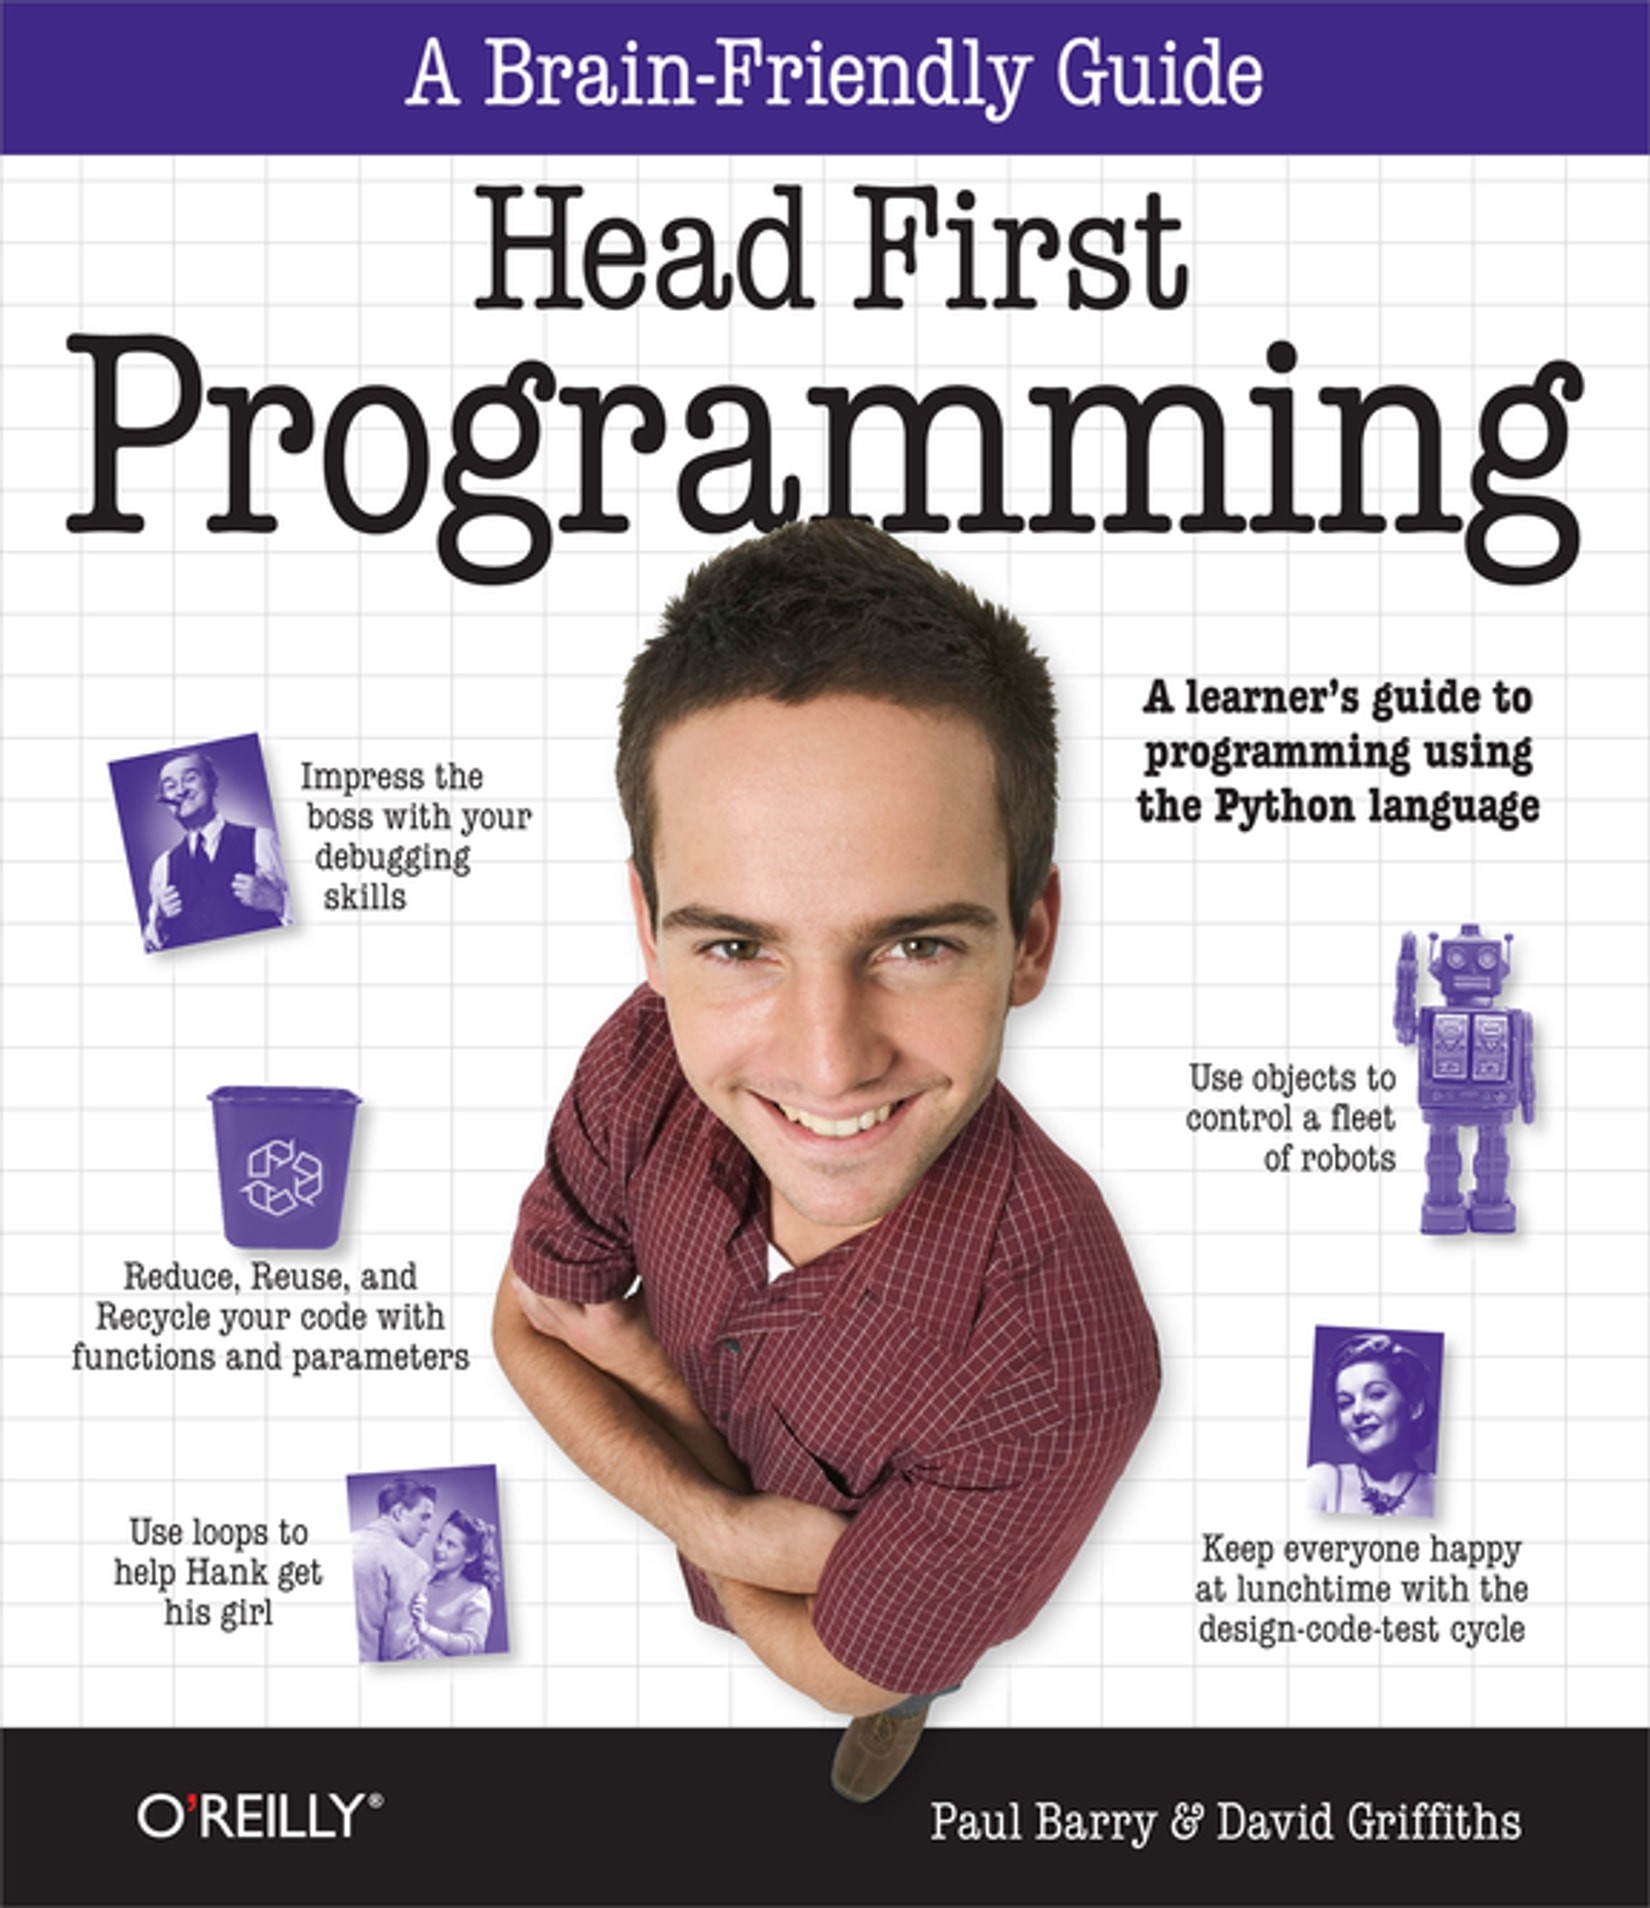 Head First Programming: A Learner's Guide to Programming using the Python Language